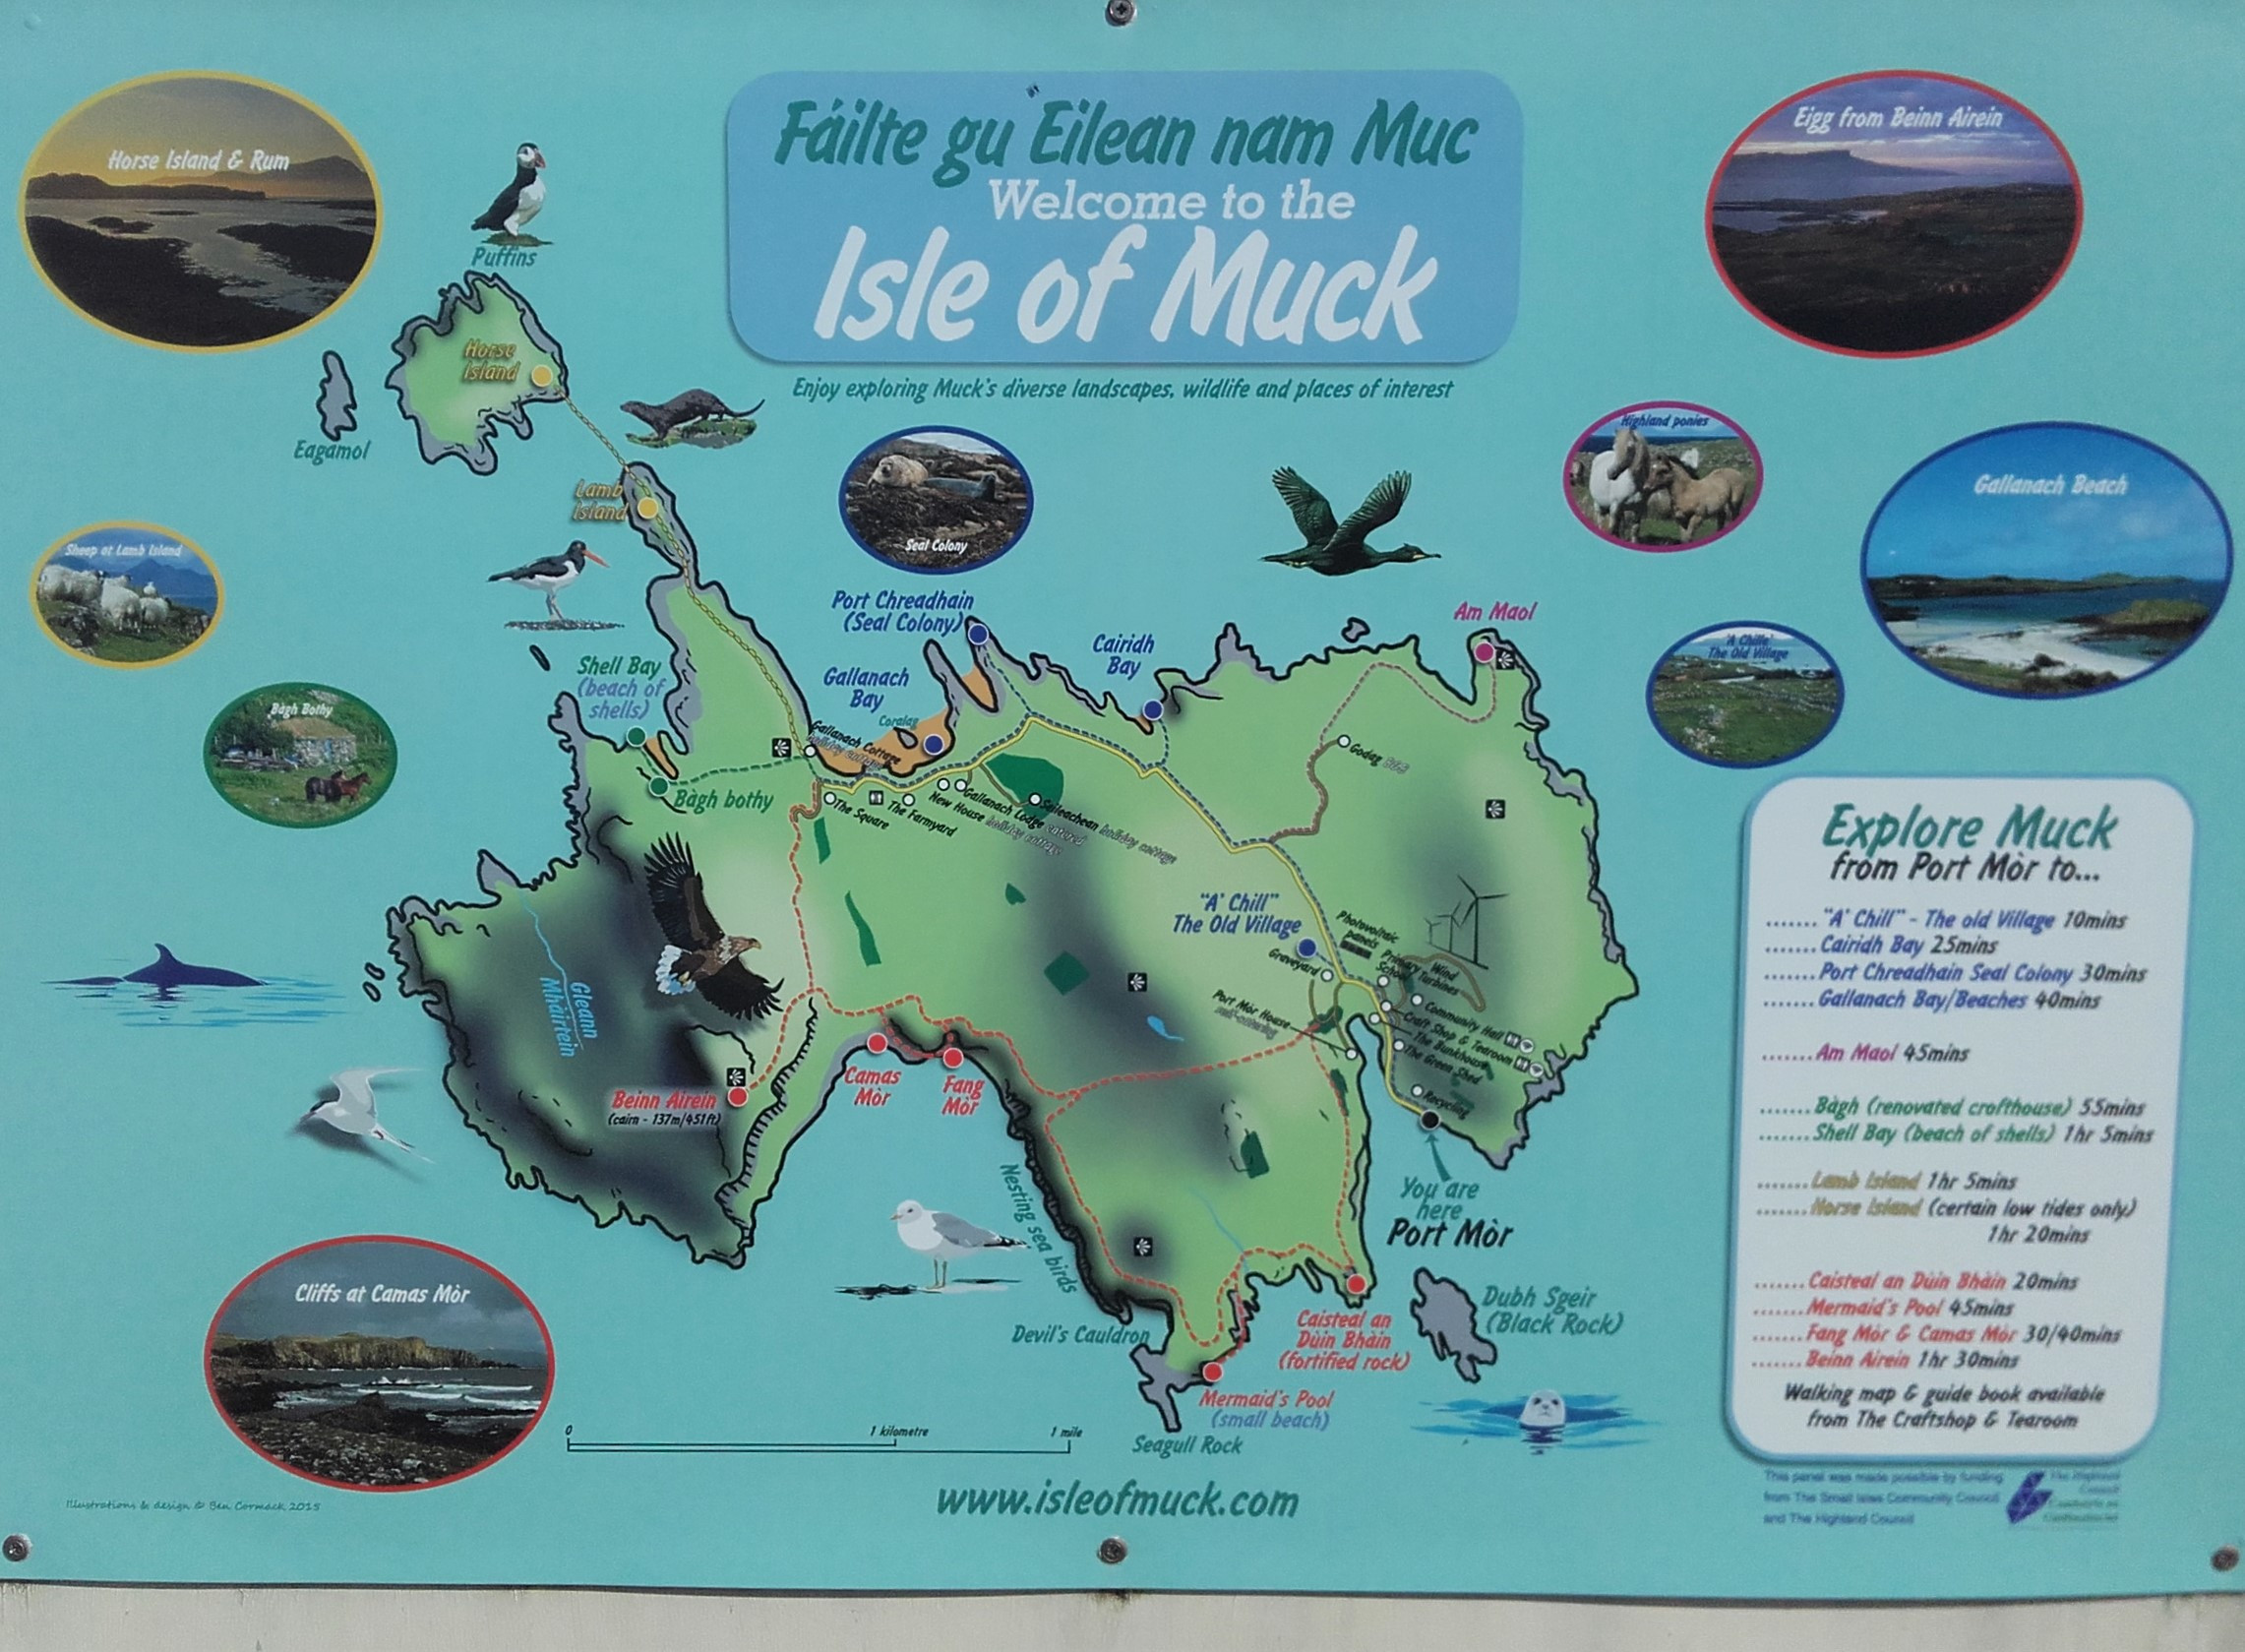 Welcome sign to the Isle of Muck with a map of the island and highlighted places of interest